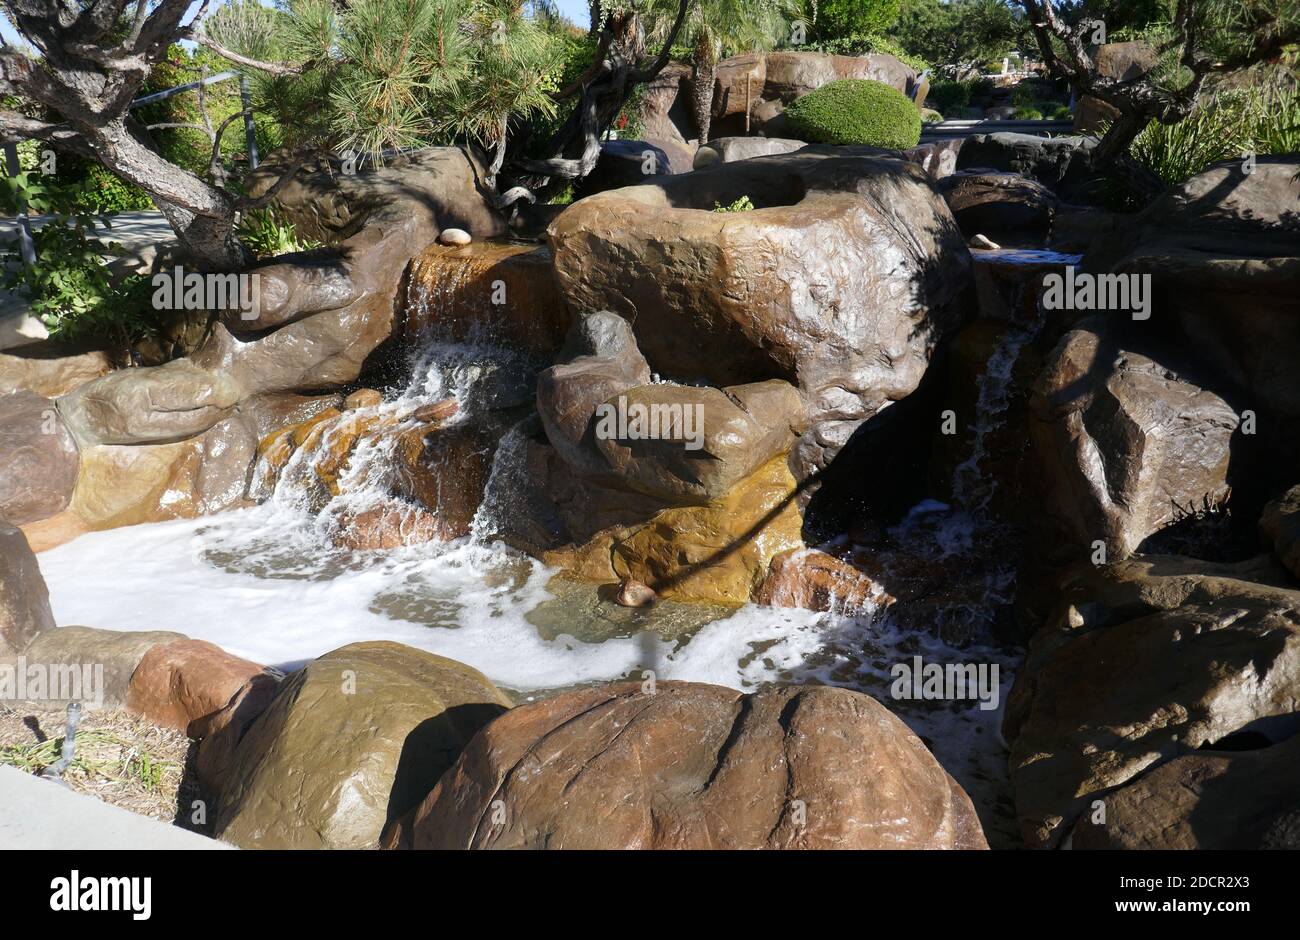 Los Angeles, California, USA 17th November 2020 A general view of atmosphere of waterfalls at Mount Sinai Cemetery Hollywood Hills on November 17, 2020 in Los Angeles, California, USA. Photo by Barry King/Alamy Stock Photo Stock Photo